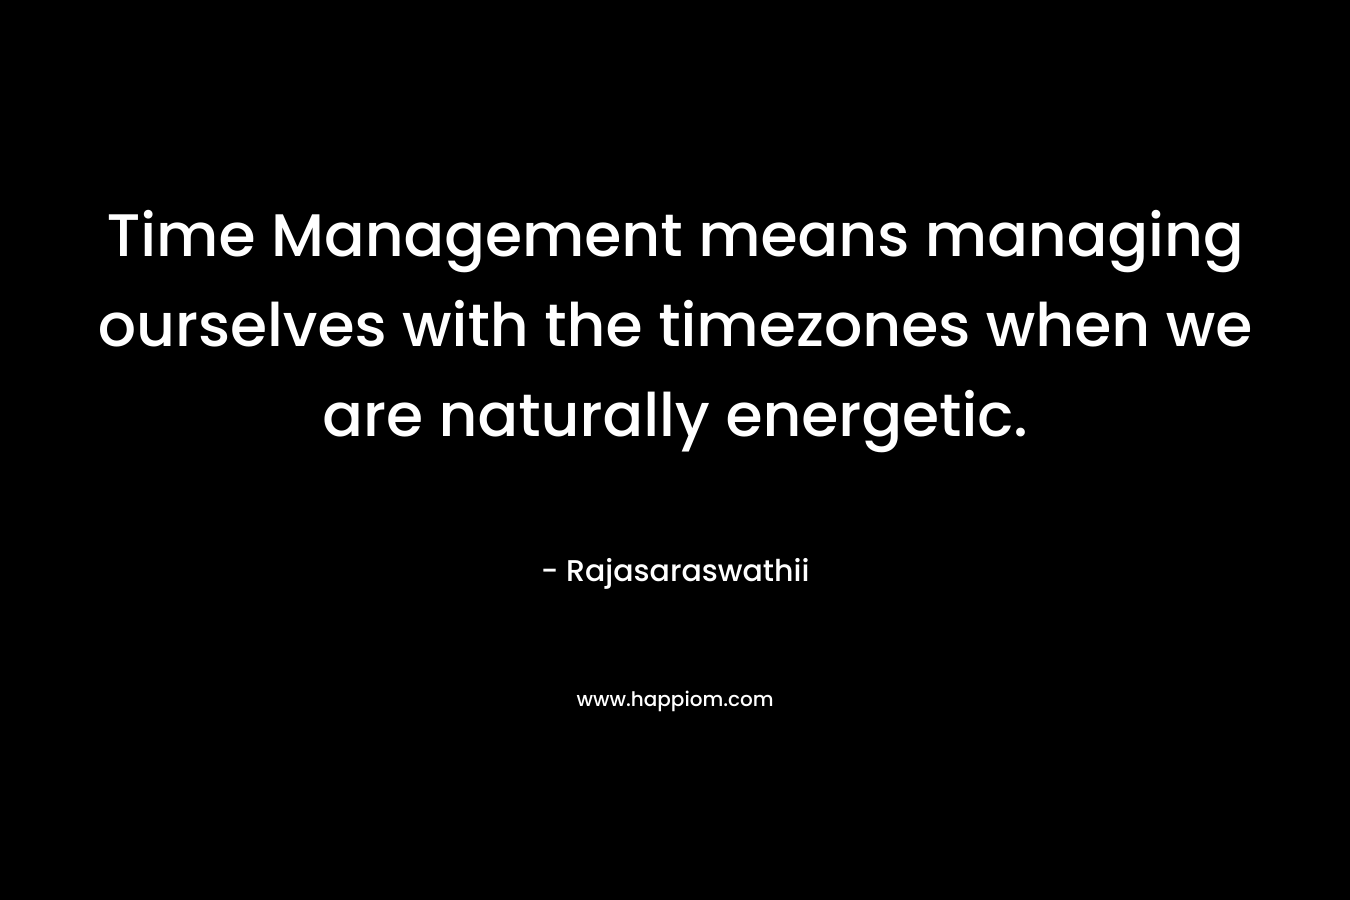 Time Management means managing ourselves with the timezones when we are naturally energetic.